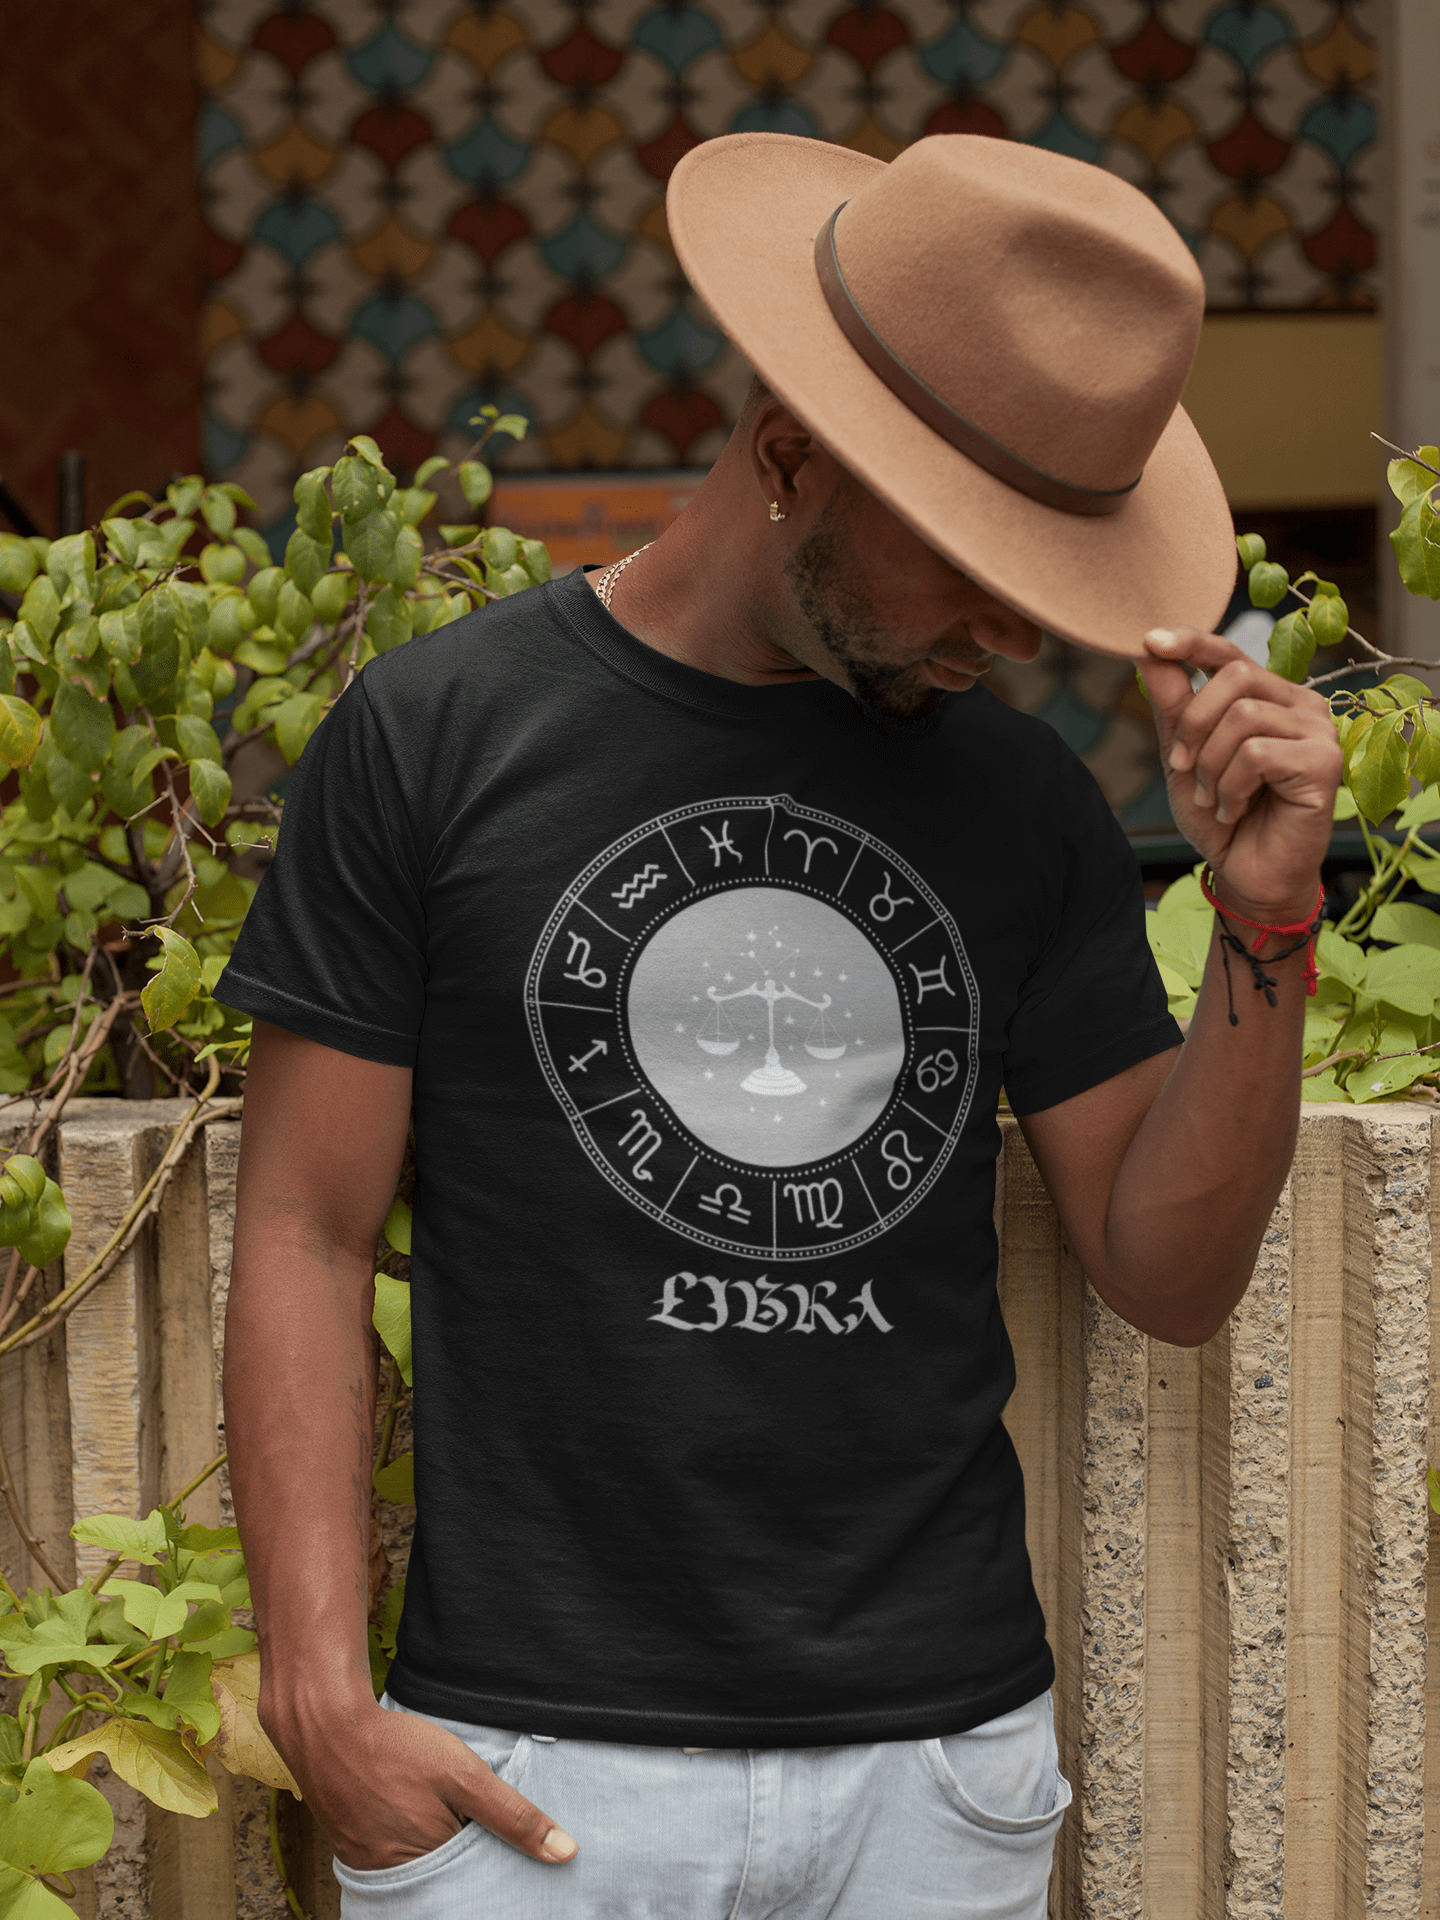 Libra Zodiac Star Sign Short-Sleeve Unisex T-Shirt Clothing T-shirts A Moment Of Now Women’s Boutique Clothing Online Lifestyle Store